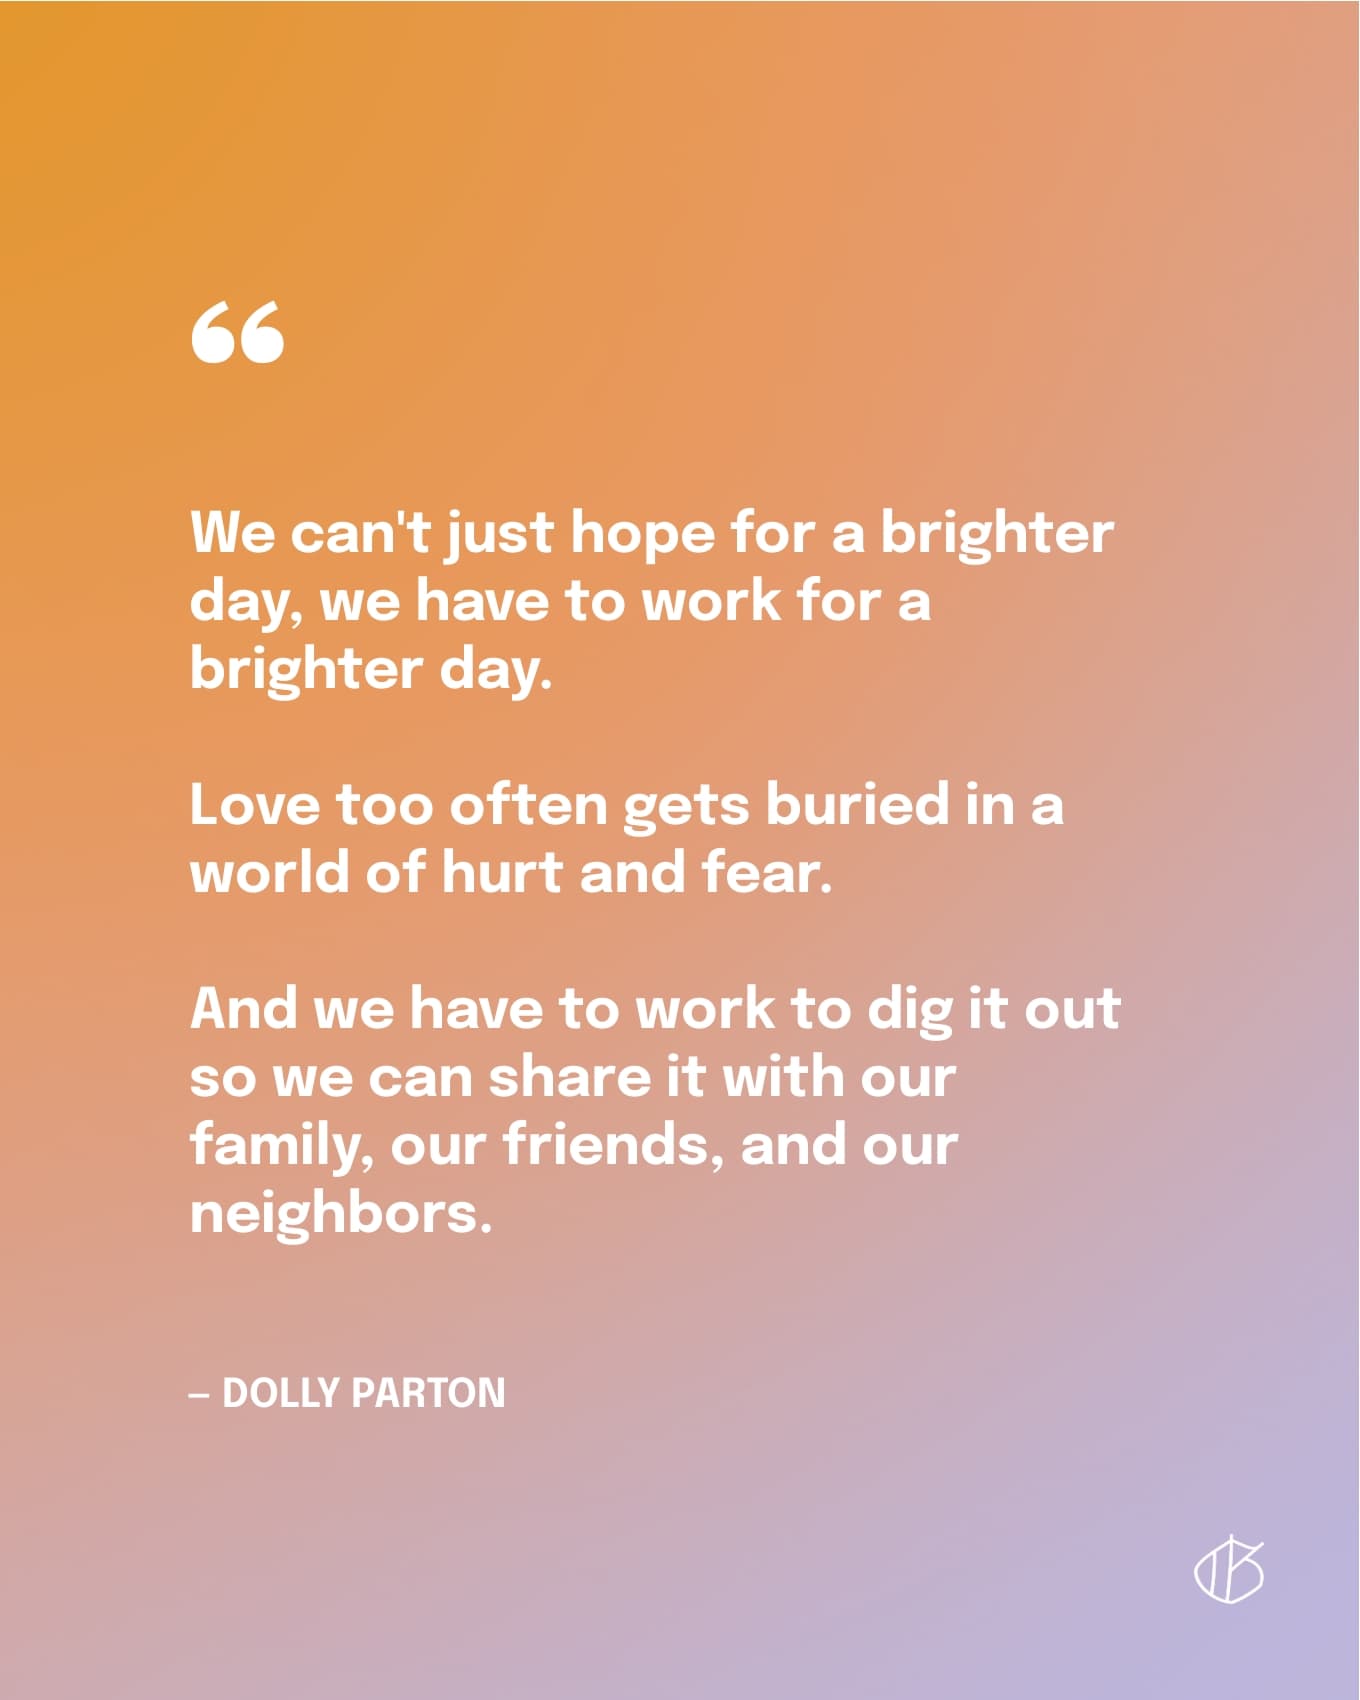 “We can't just hope for a brighter day, we have to work for a brighter day. Love too often gets buried in a world of hurt and fear. And we have to work to dig it out so we can share it with our family, our friends, and our neighbors.” — Dolly Parton